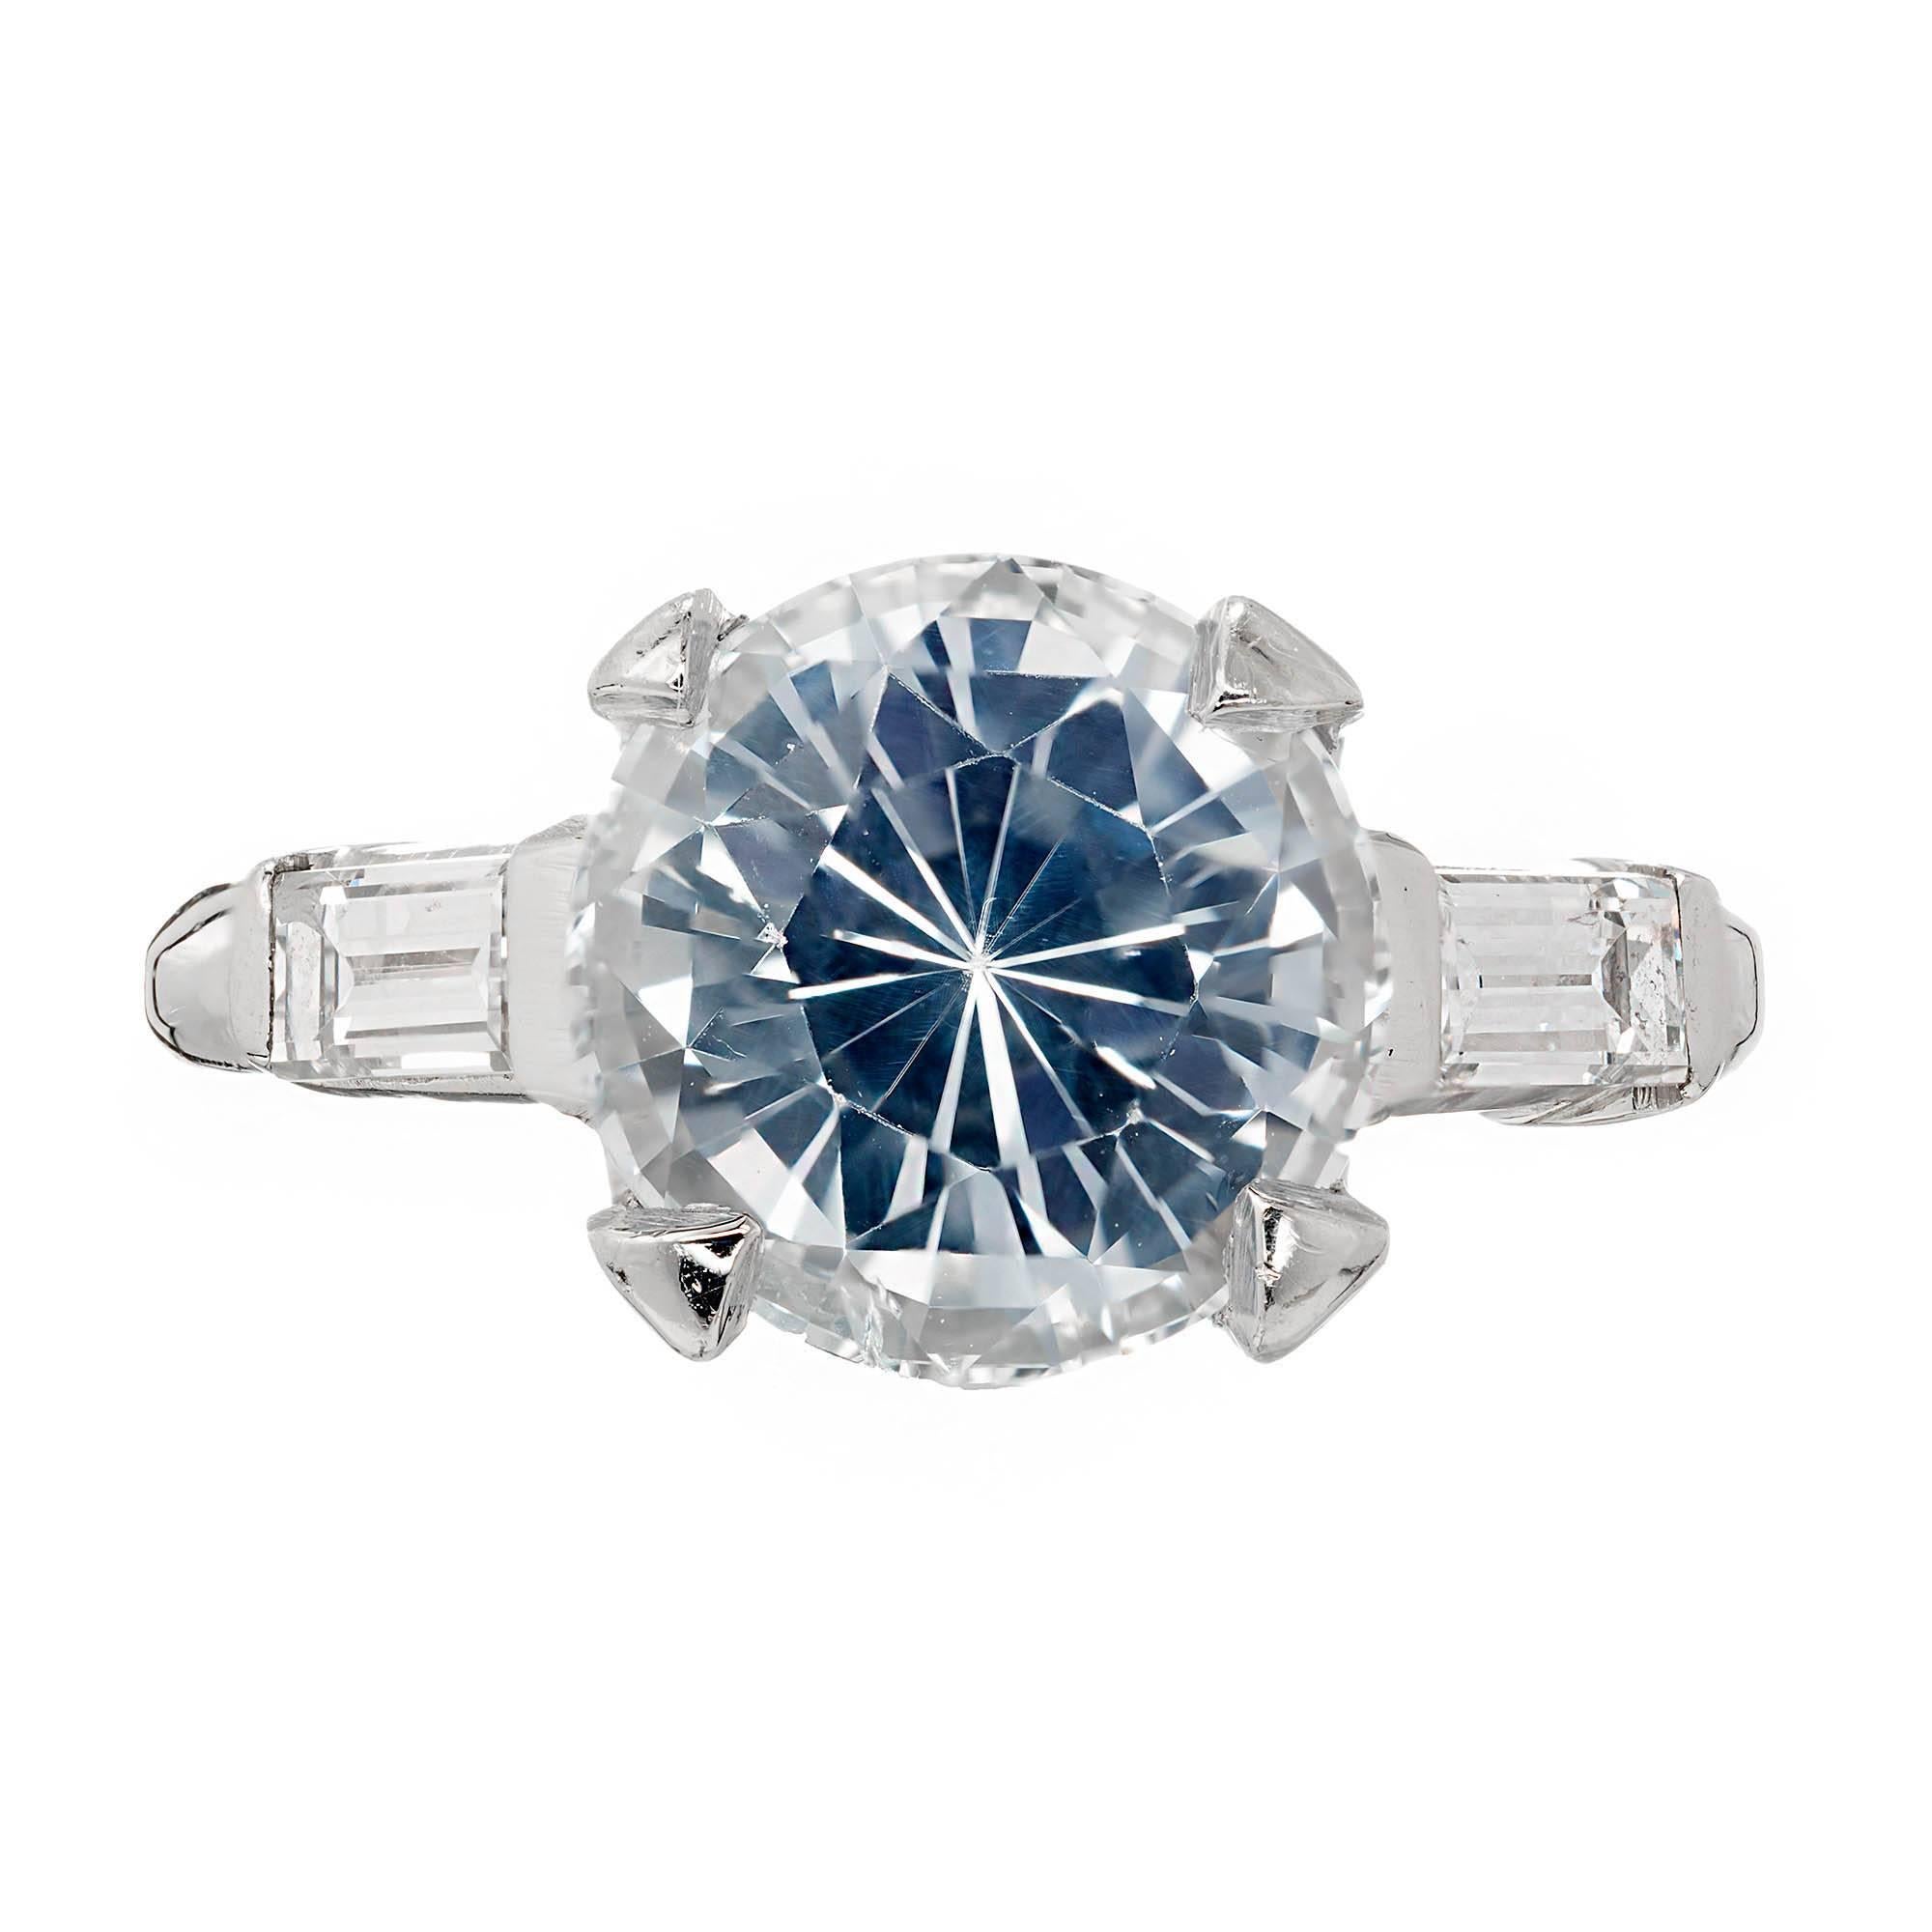 GIA certified natural light blue round Sapphire with 2 side baguette diamonds in Platinum engagement ring setting.  circa 1940.

1 round European cut very light blue Sapphire, approx. total weight 3.93ct, VS, natural color, simple heat only, GIA